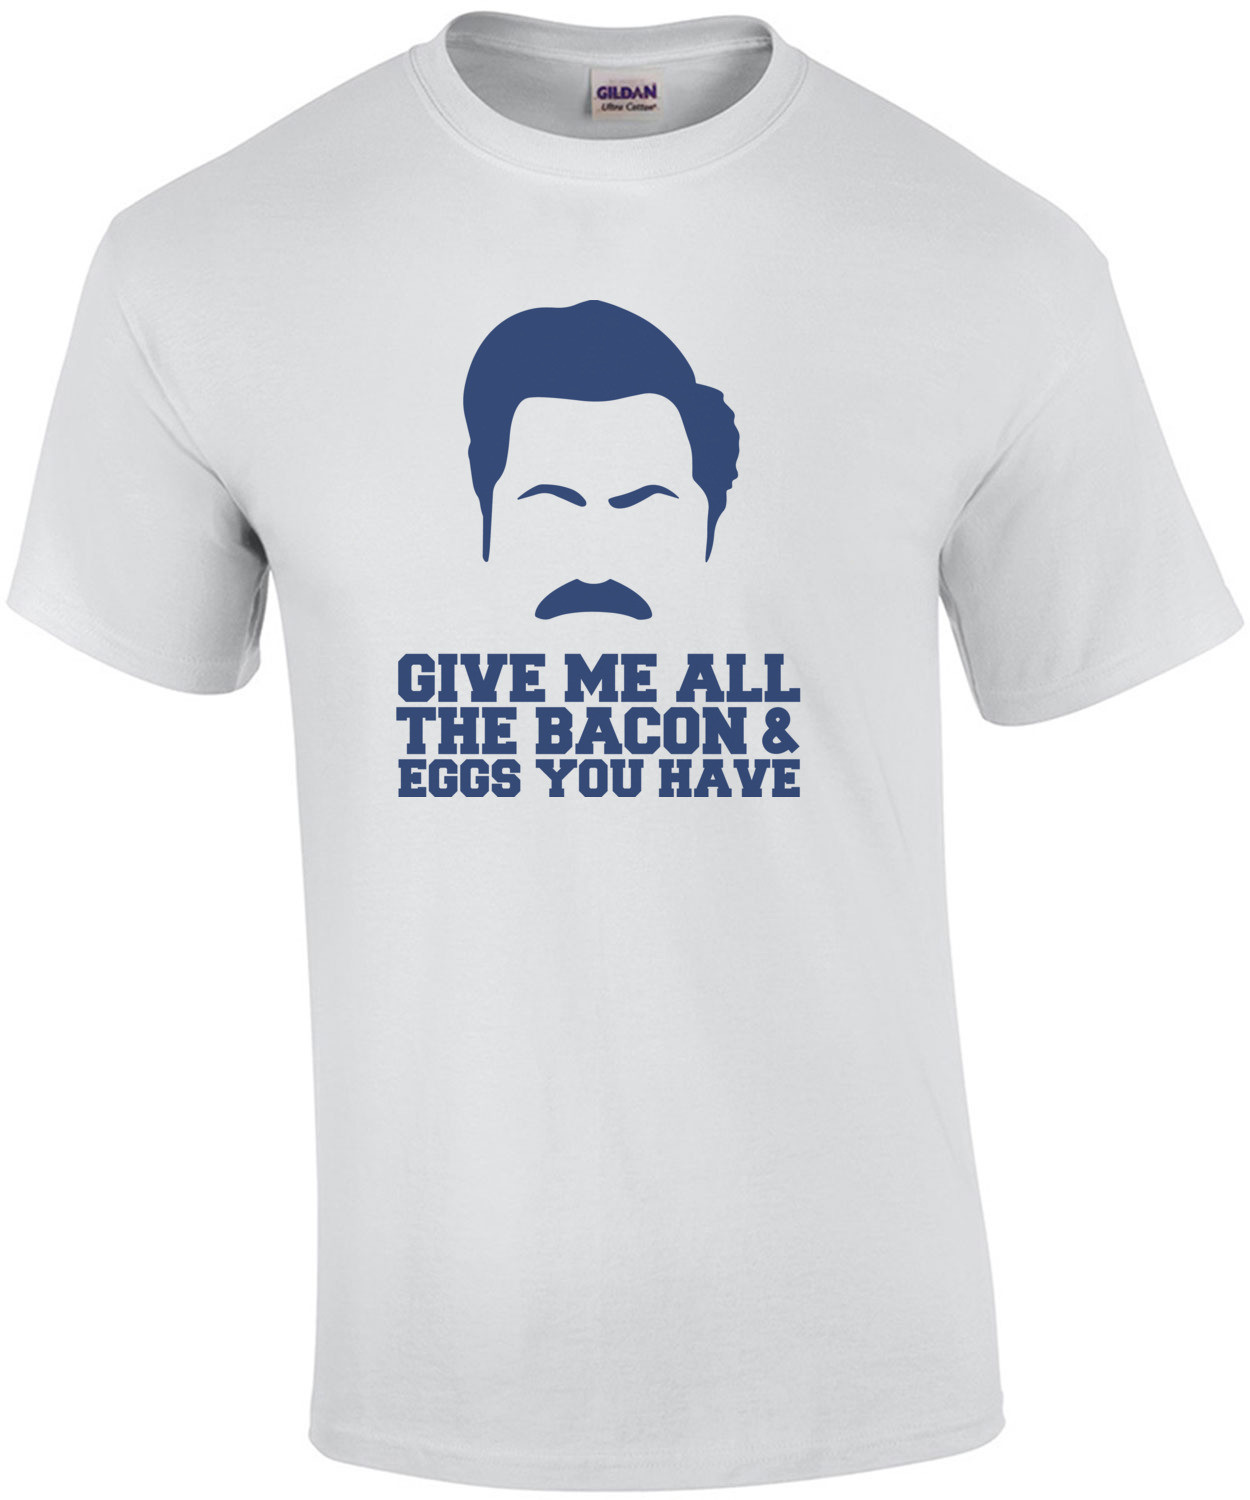 Give me all the bacon and eggs you have - Parks and Recreation - Ron Swanson T-Shirt